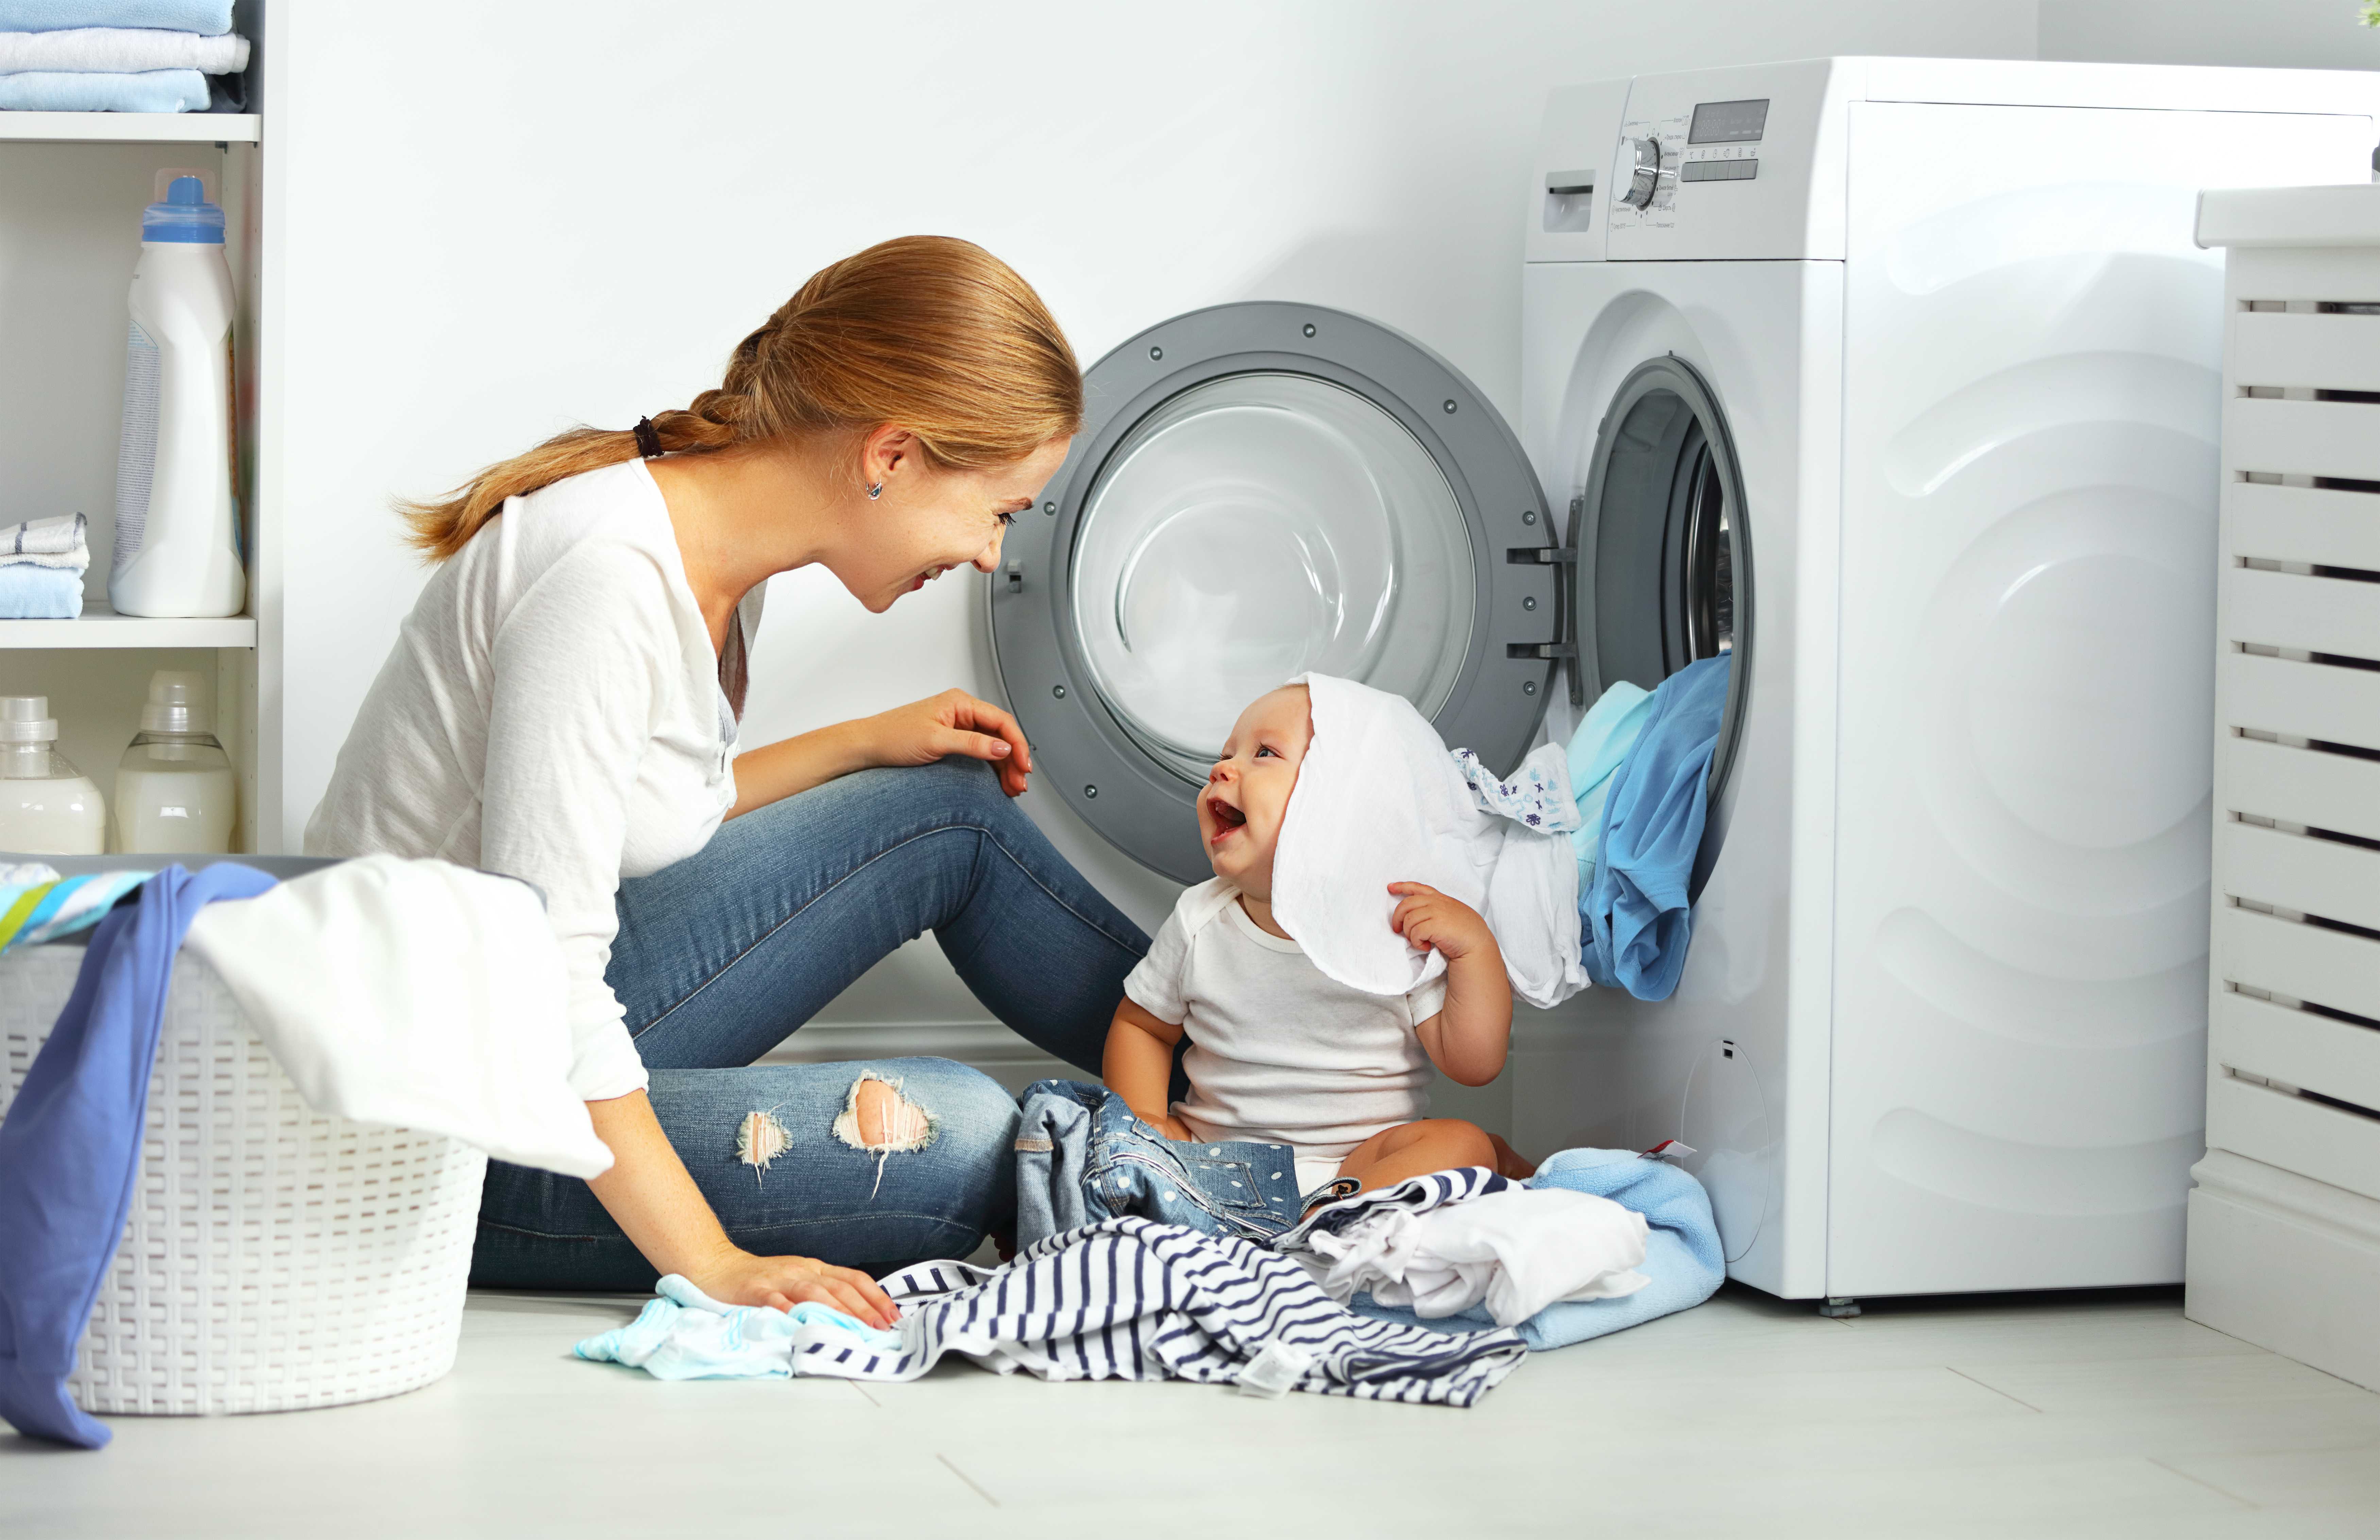 How Much Laundry Detergent To Use - Laundry Tips